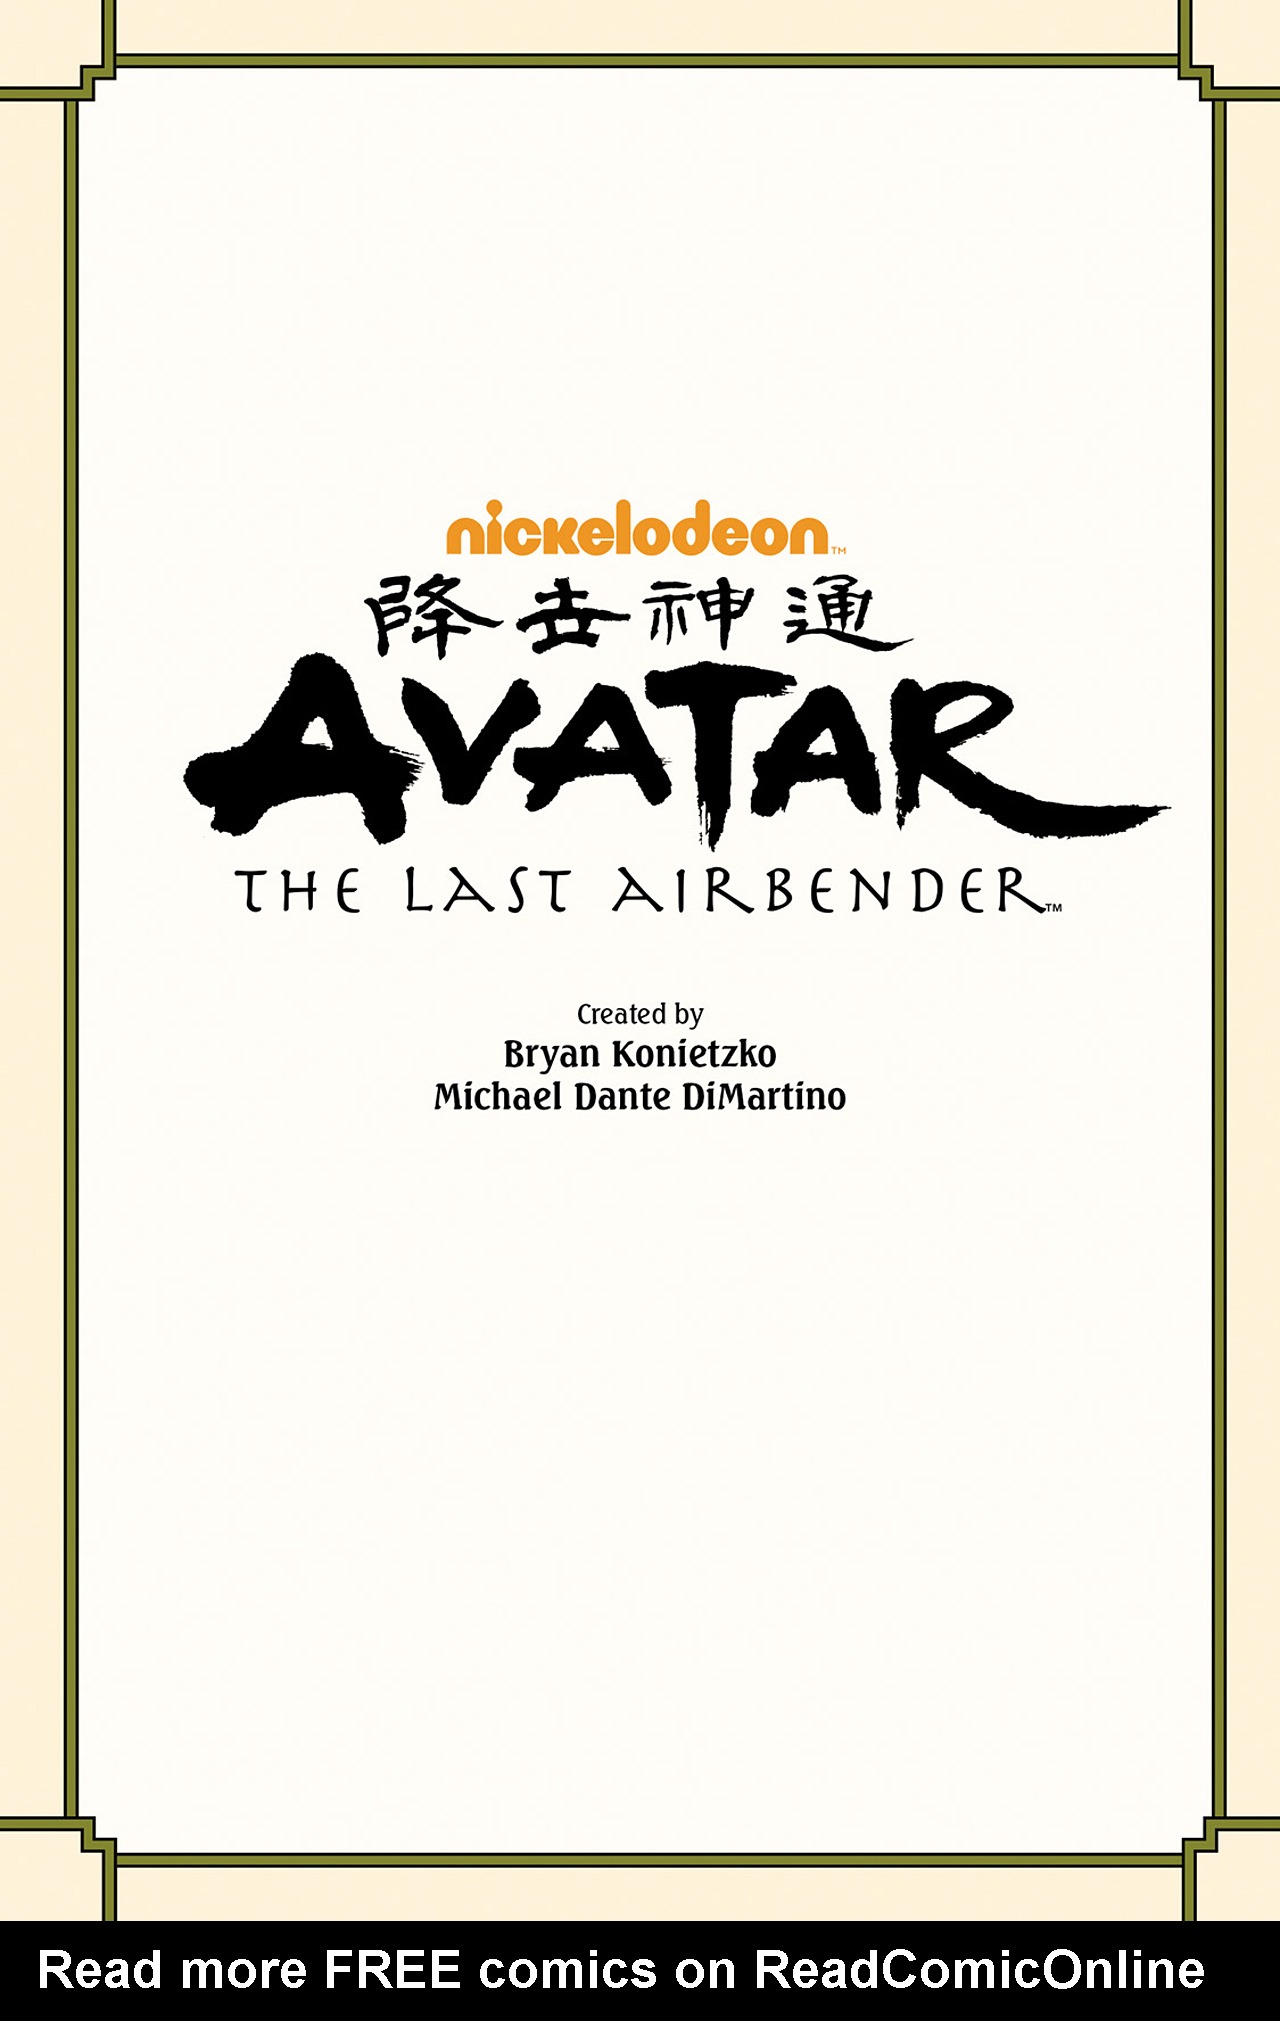 Read online Nickelodeon Avatar: The Last Airbender - The Search comic -  Issue # Part 2 - 2